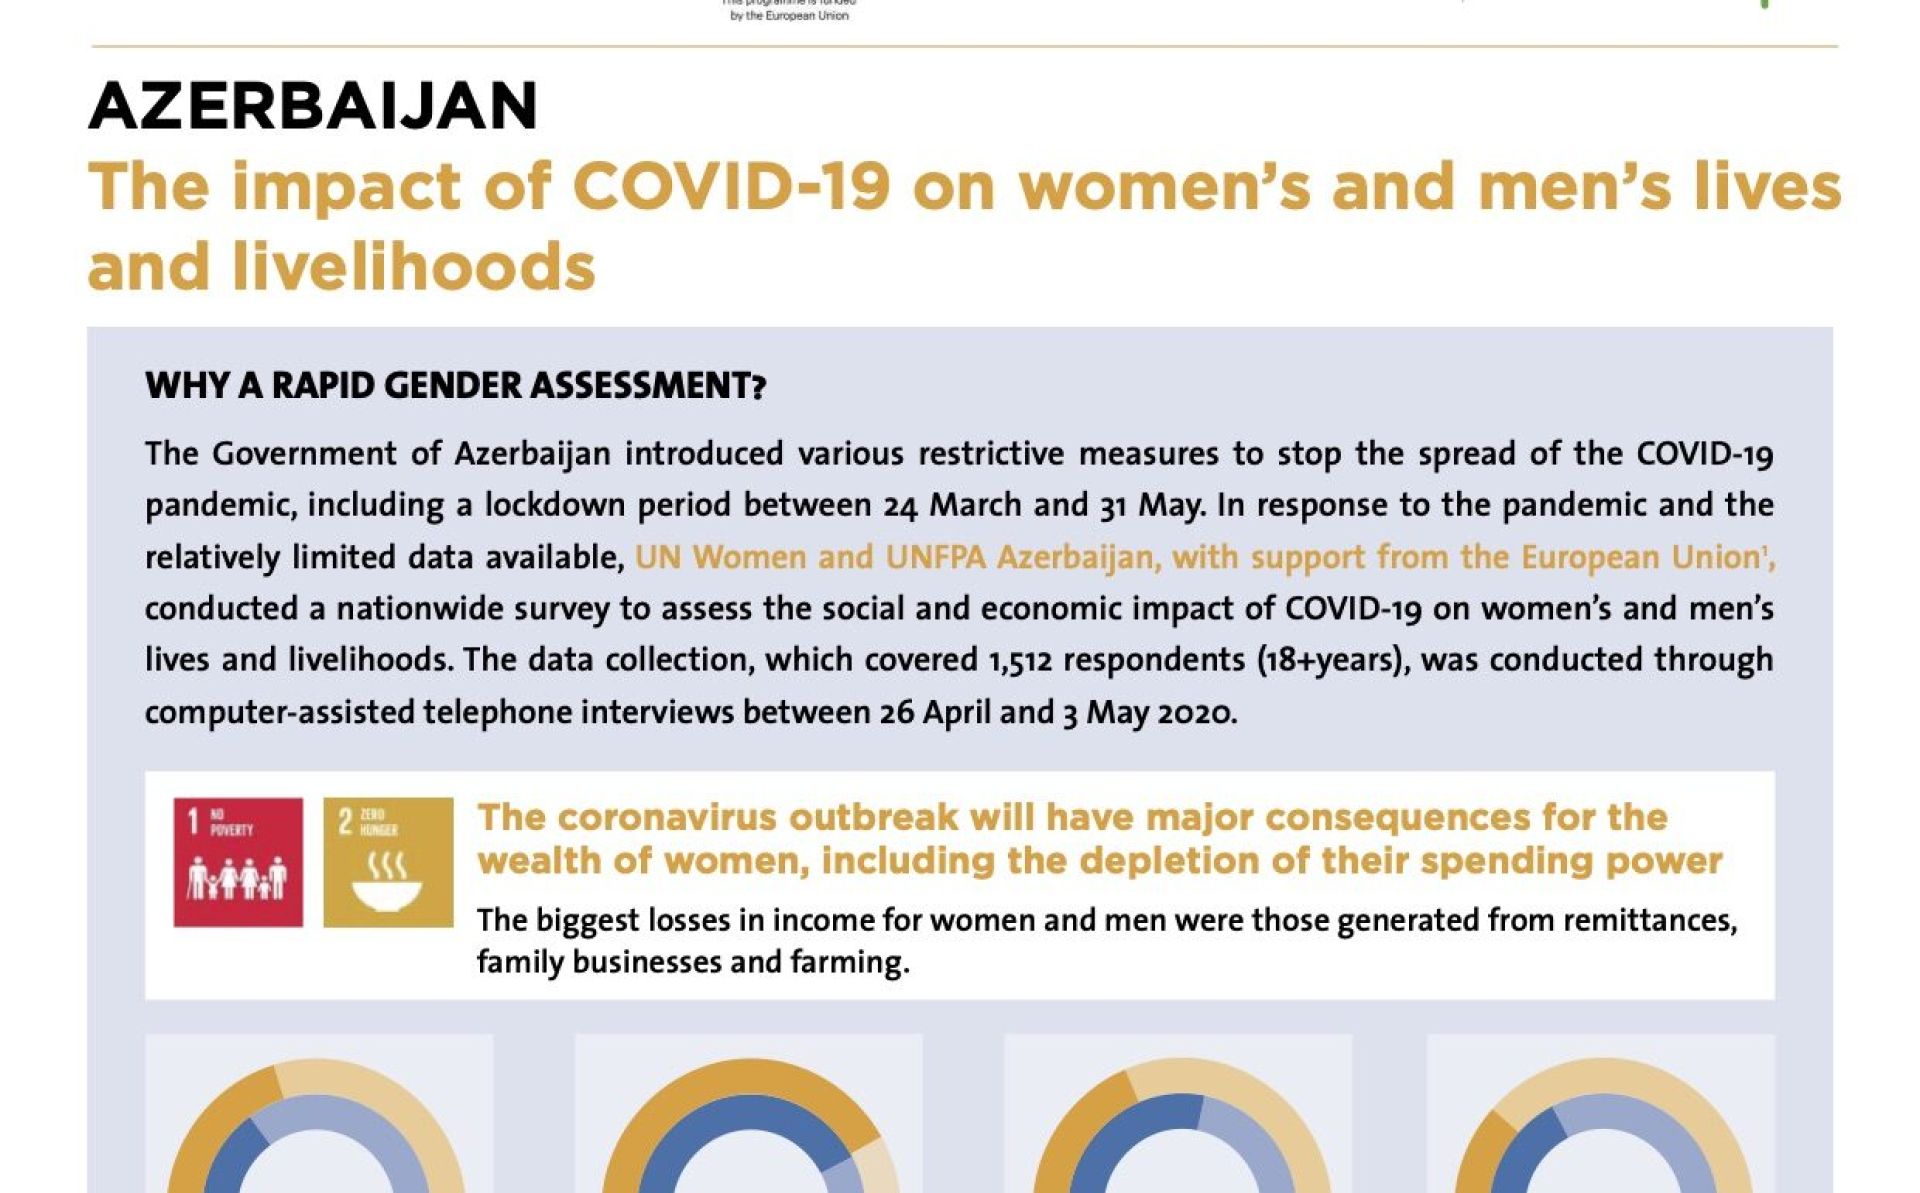 Azerbaijan: the impact of COVID-19 on women’s and men’s lives and livelihoods